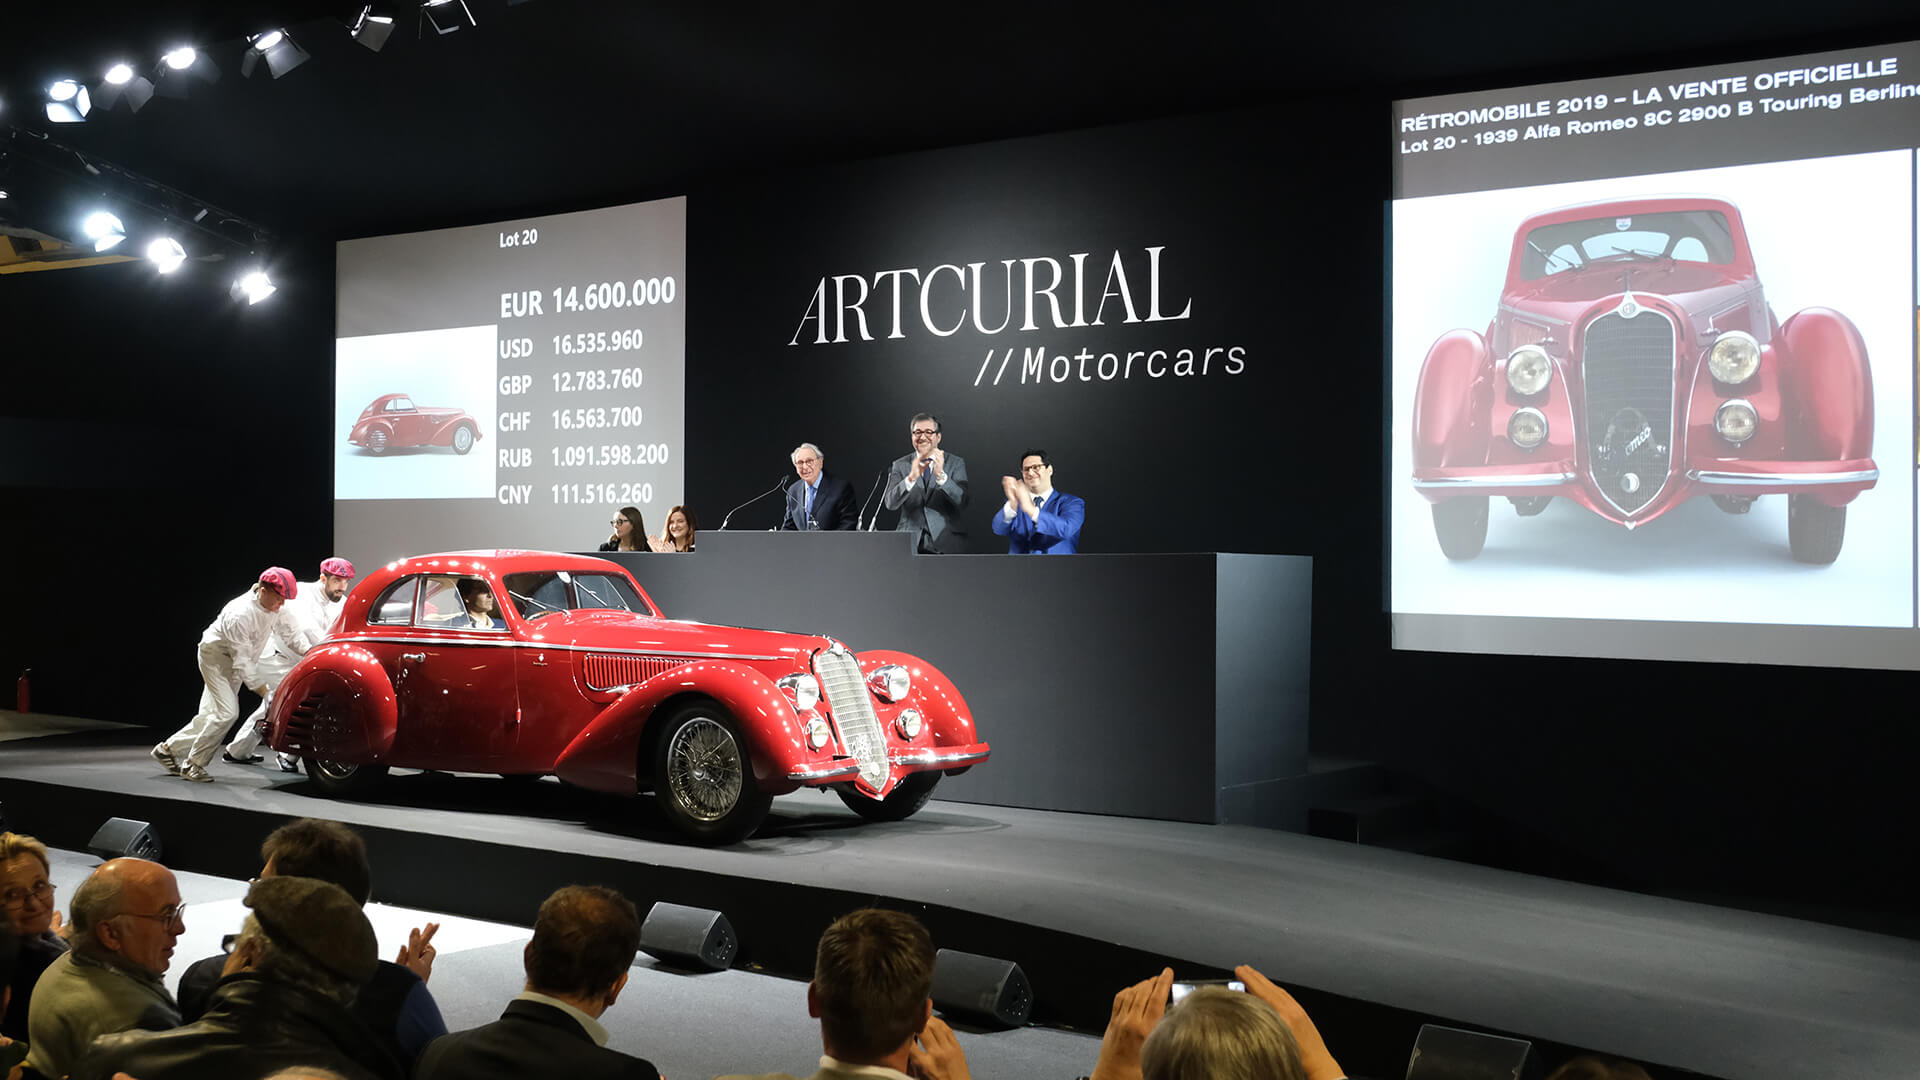 Fortune favours the brave – Artcurial sells the Alfa Romeo 8C 2.9 for €16.4m